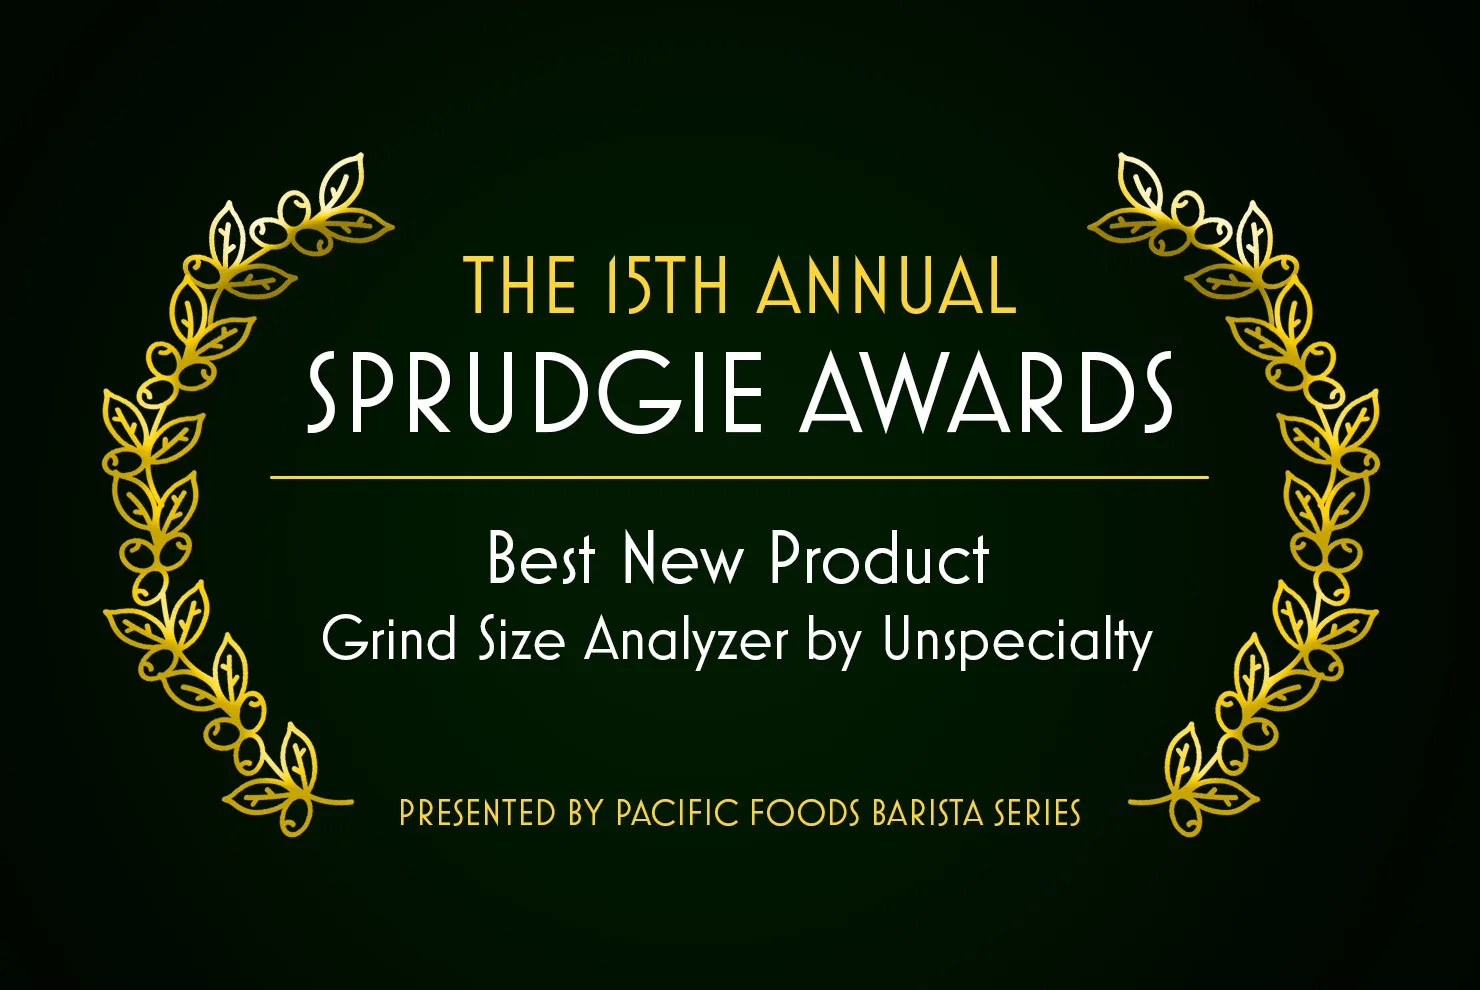 sprudgie awards 15 best new product